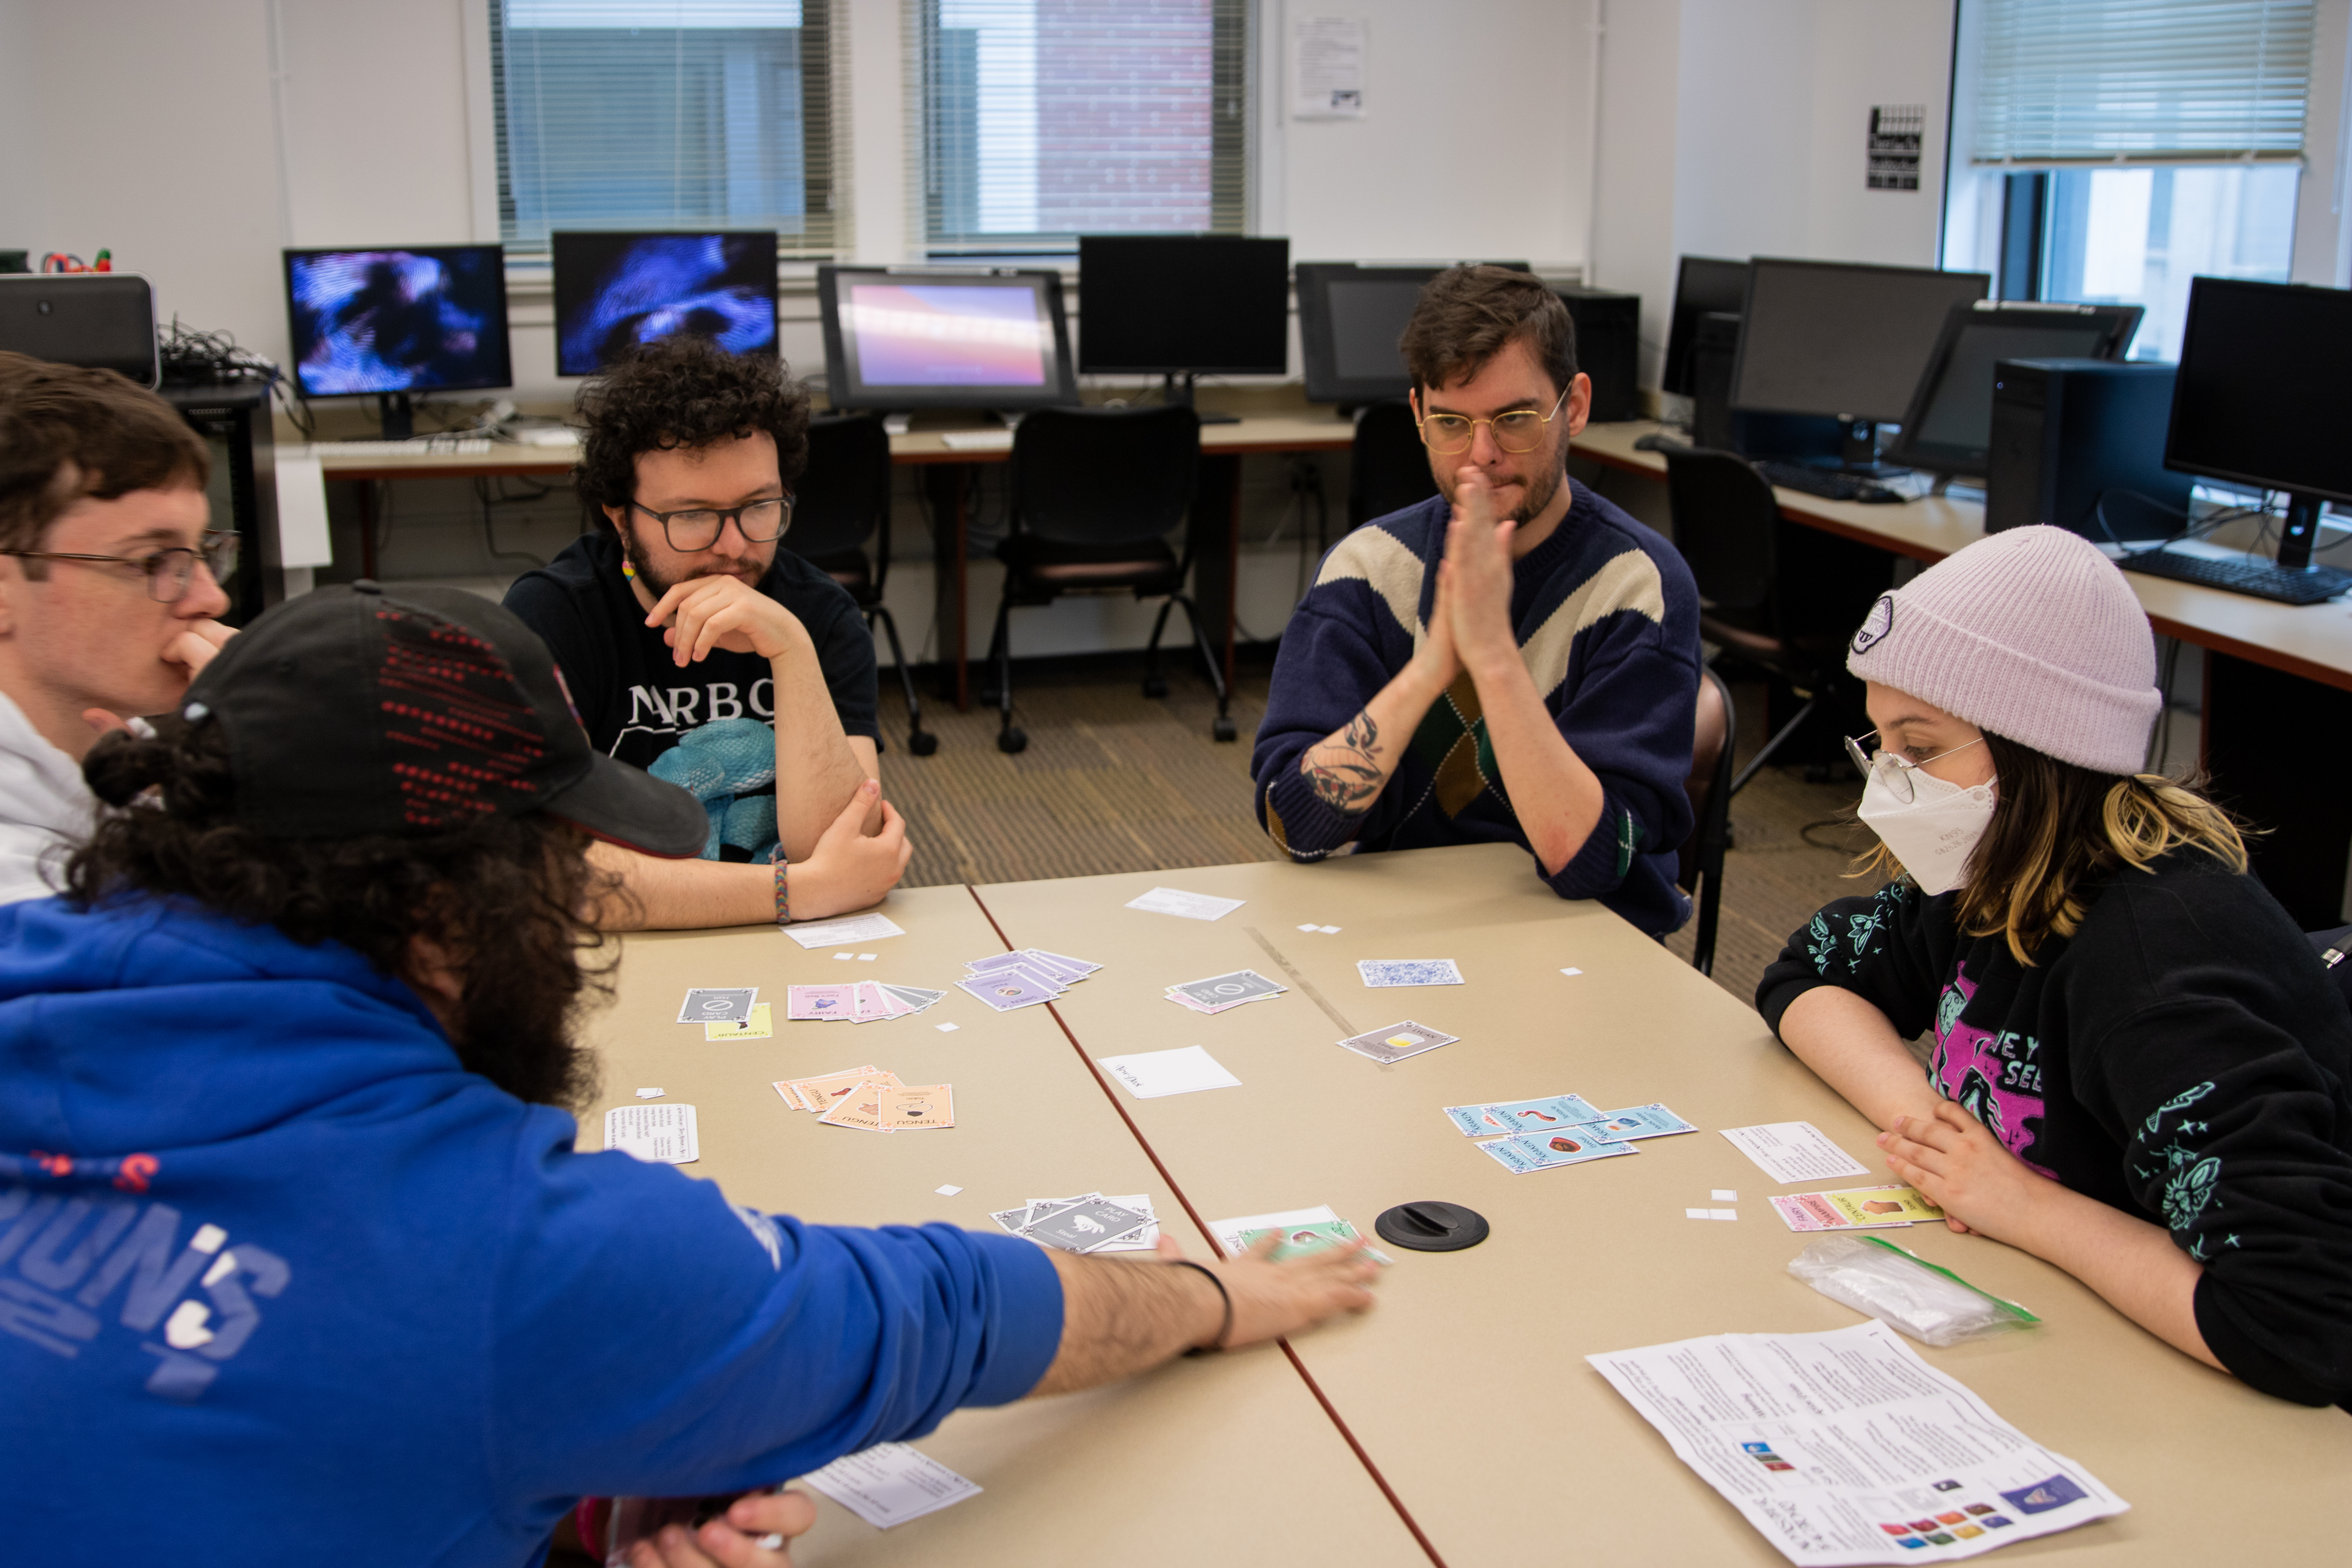 Students around a table play card games